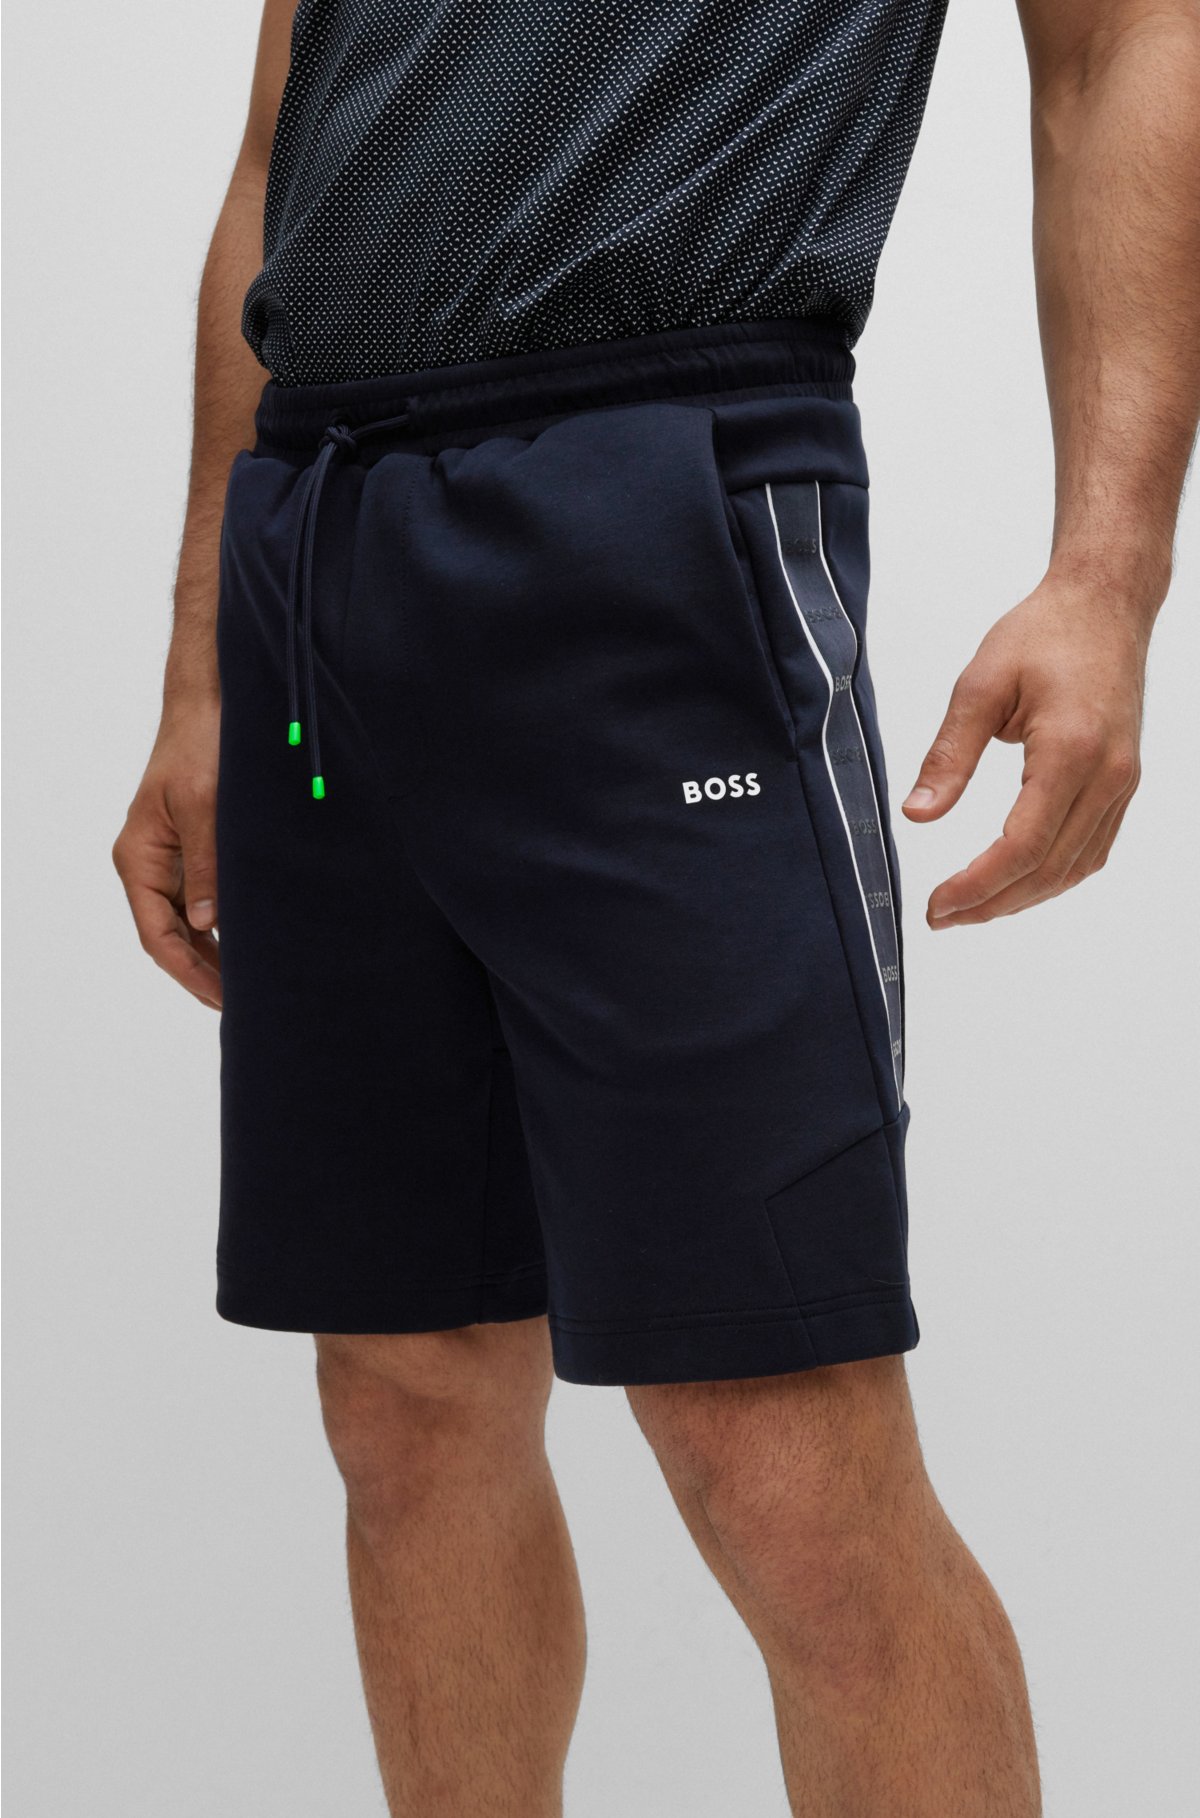 BOSS - BOSS x NFL cotton-terry shorts with collaborative branding